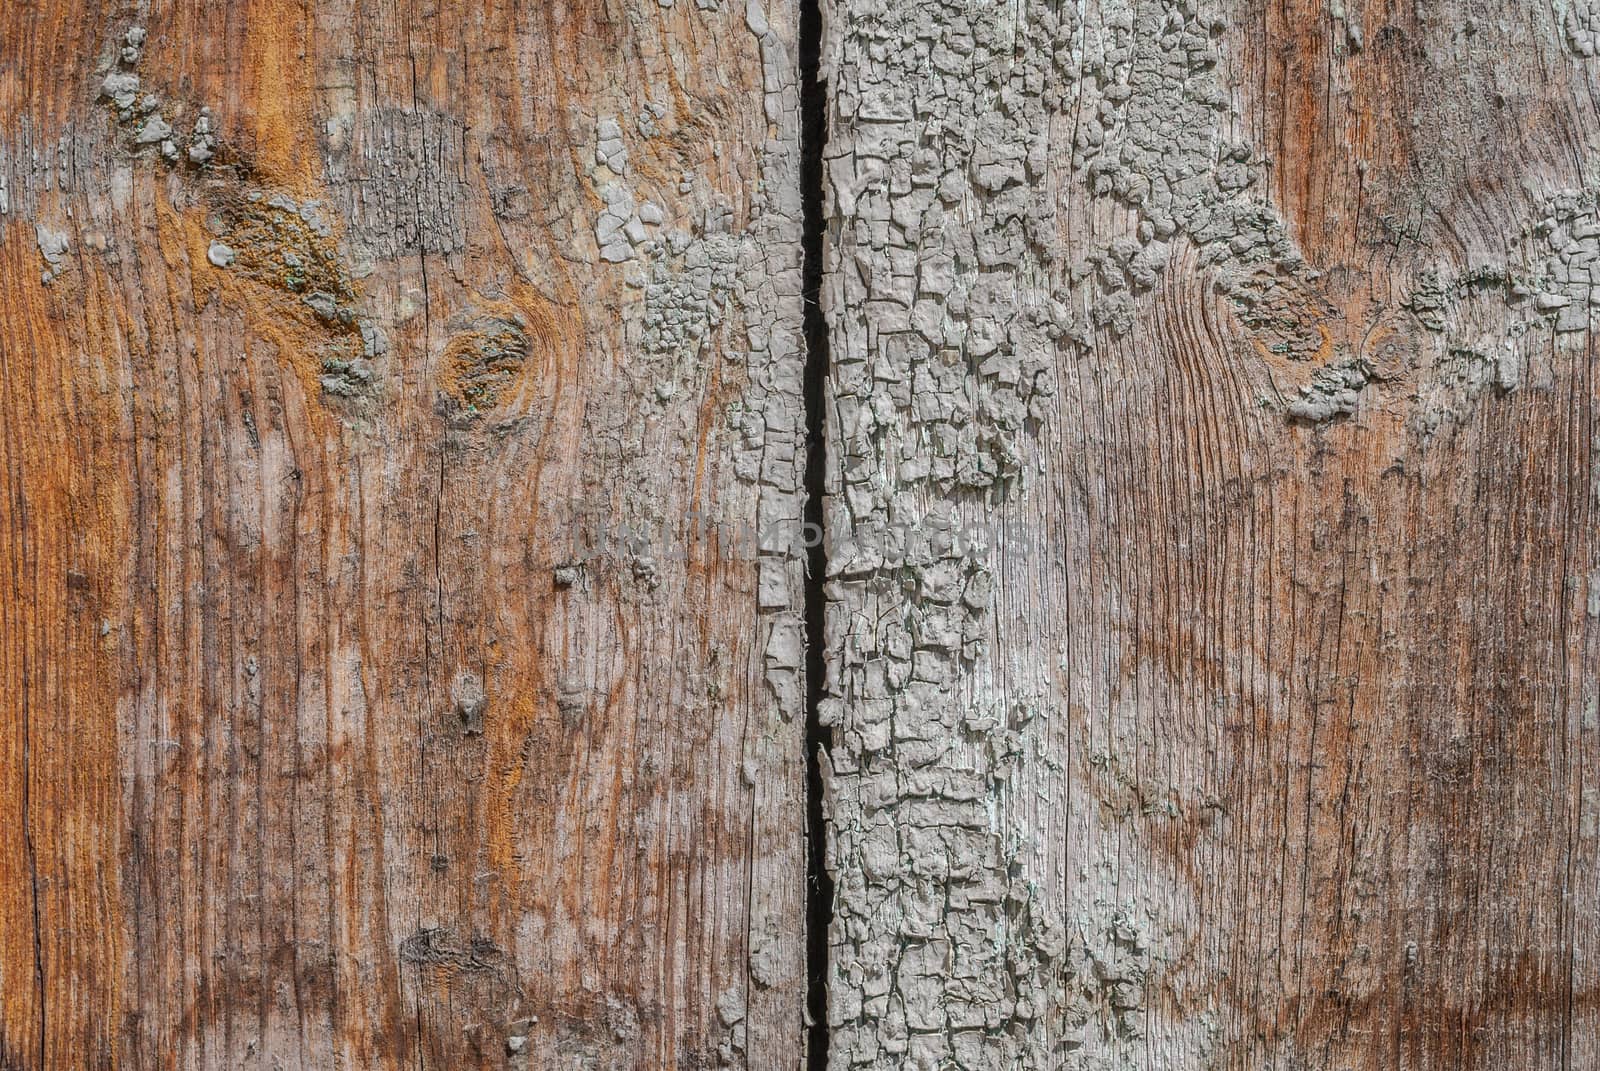 old wooden boards with cracks and peeling paint, chipped paint, texture, background by uvisni